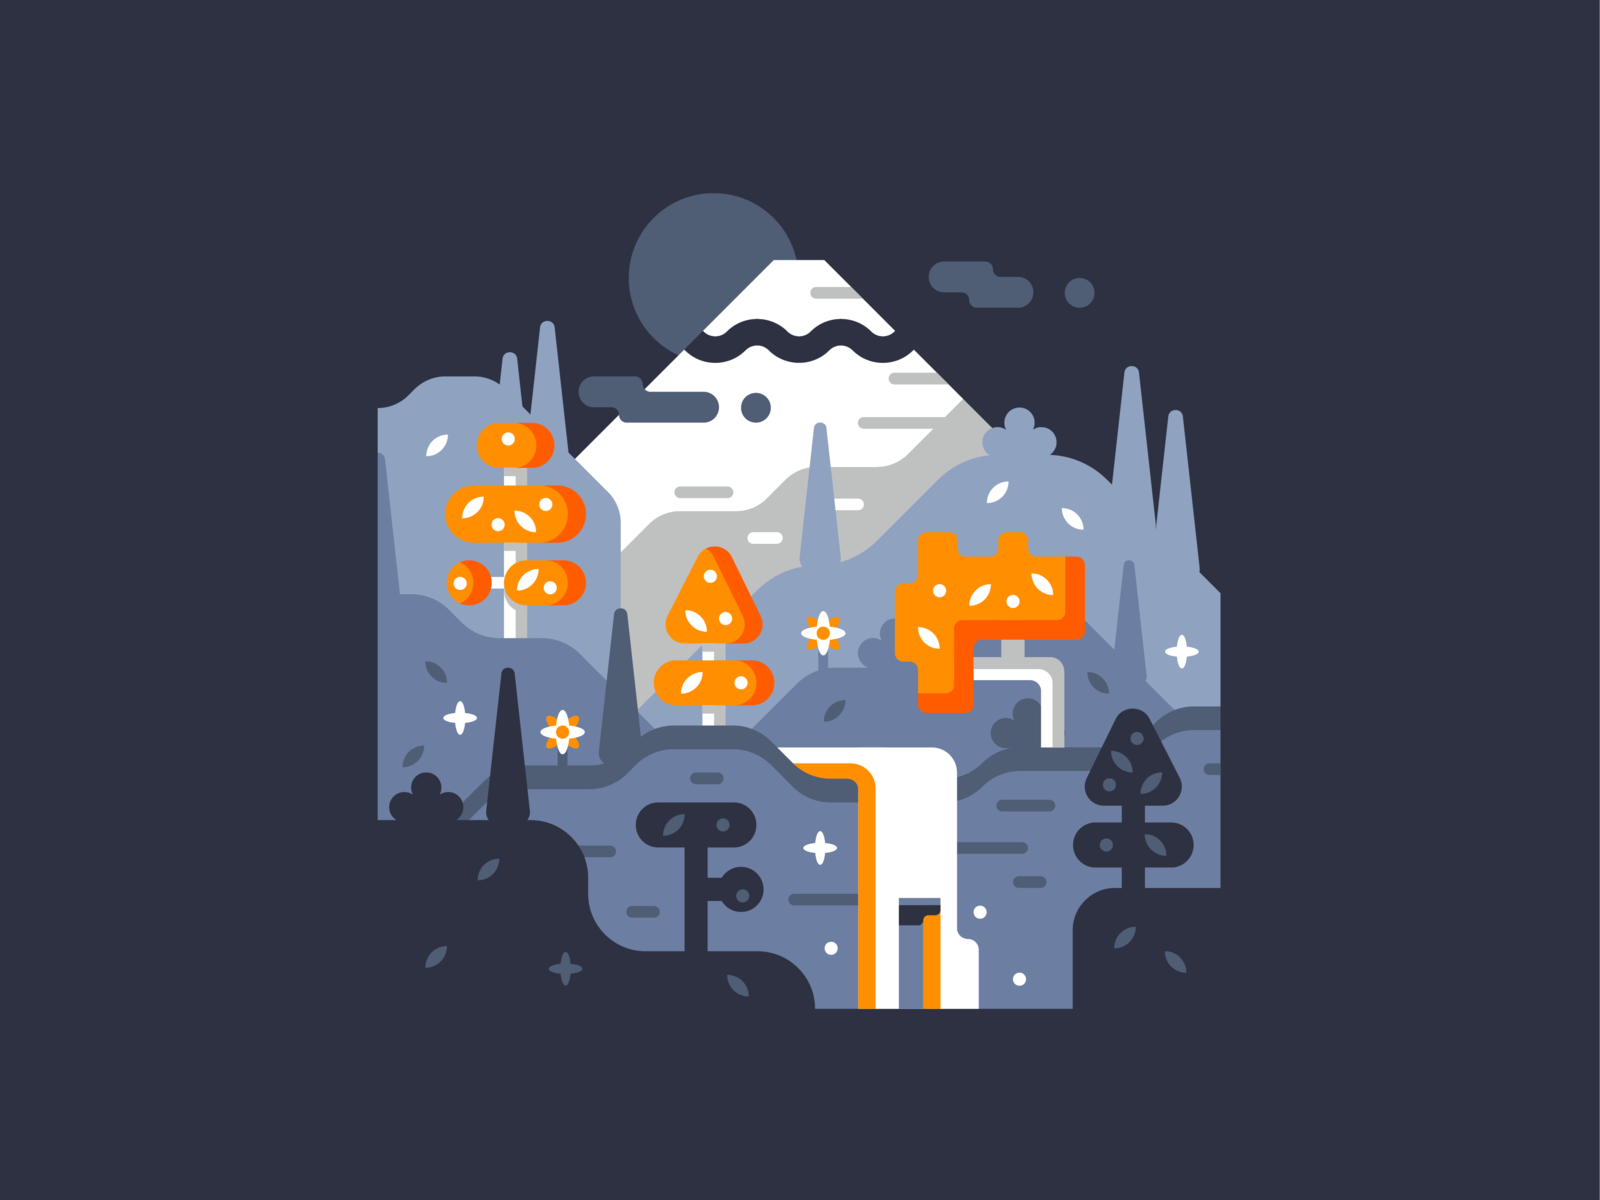 Mountain Valley by Ether Potion on Dribbble